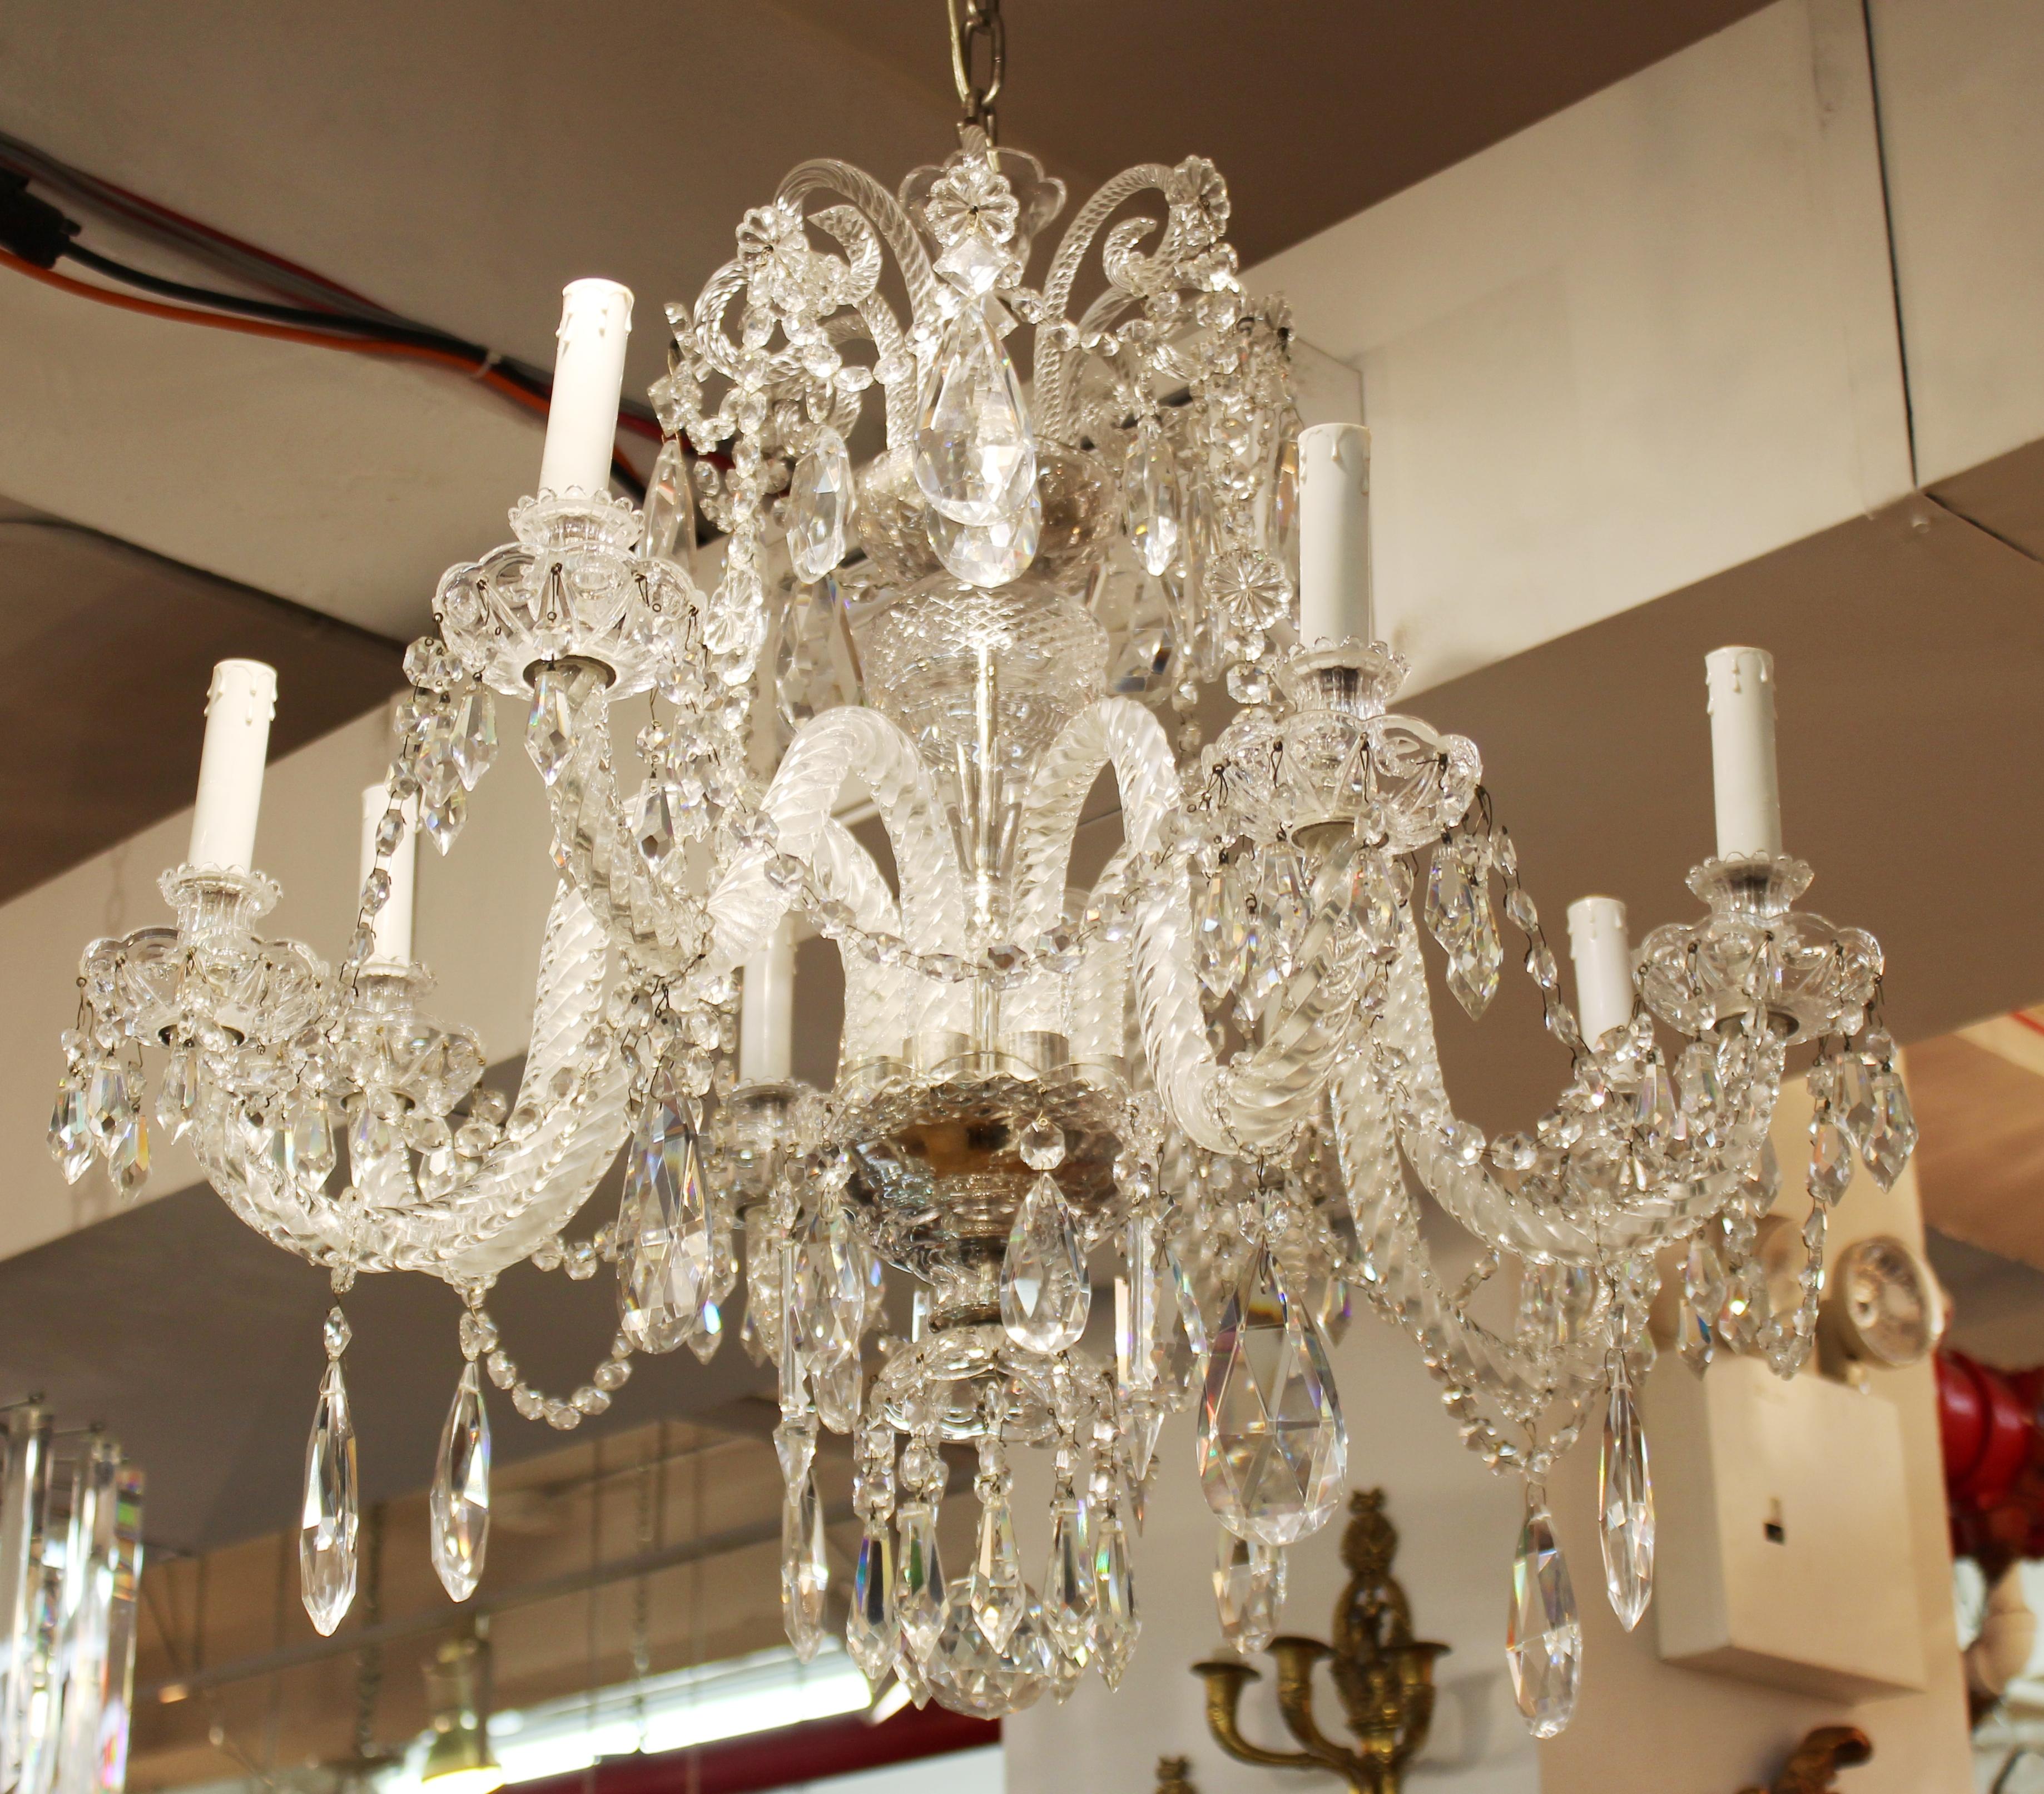 Neoclassical style crystal chandelier by Spanish maker Martinez y Ortz. The piece has eight light arms and a multitude of decorative crystal droplets and is signed. In great vintage condition with age-appropriate wear and use. 